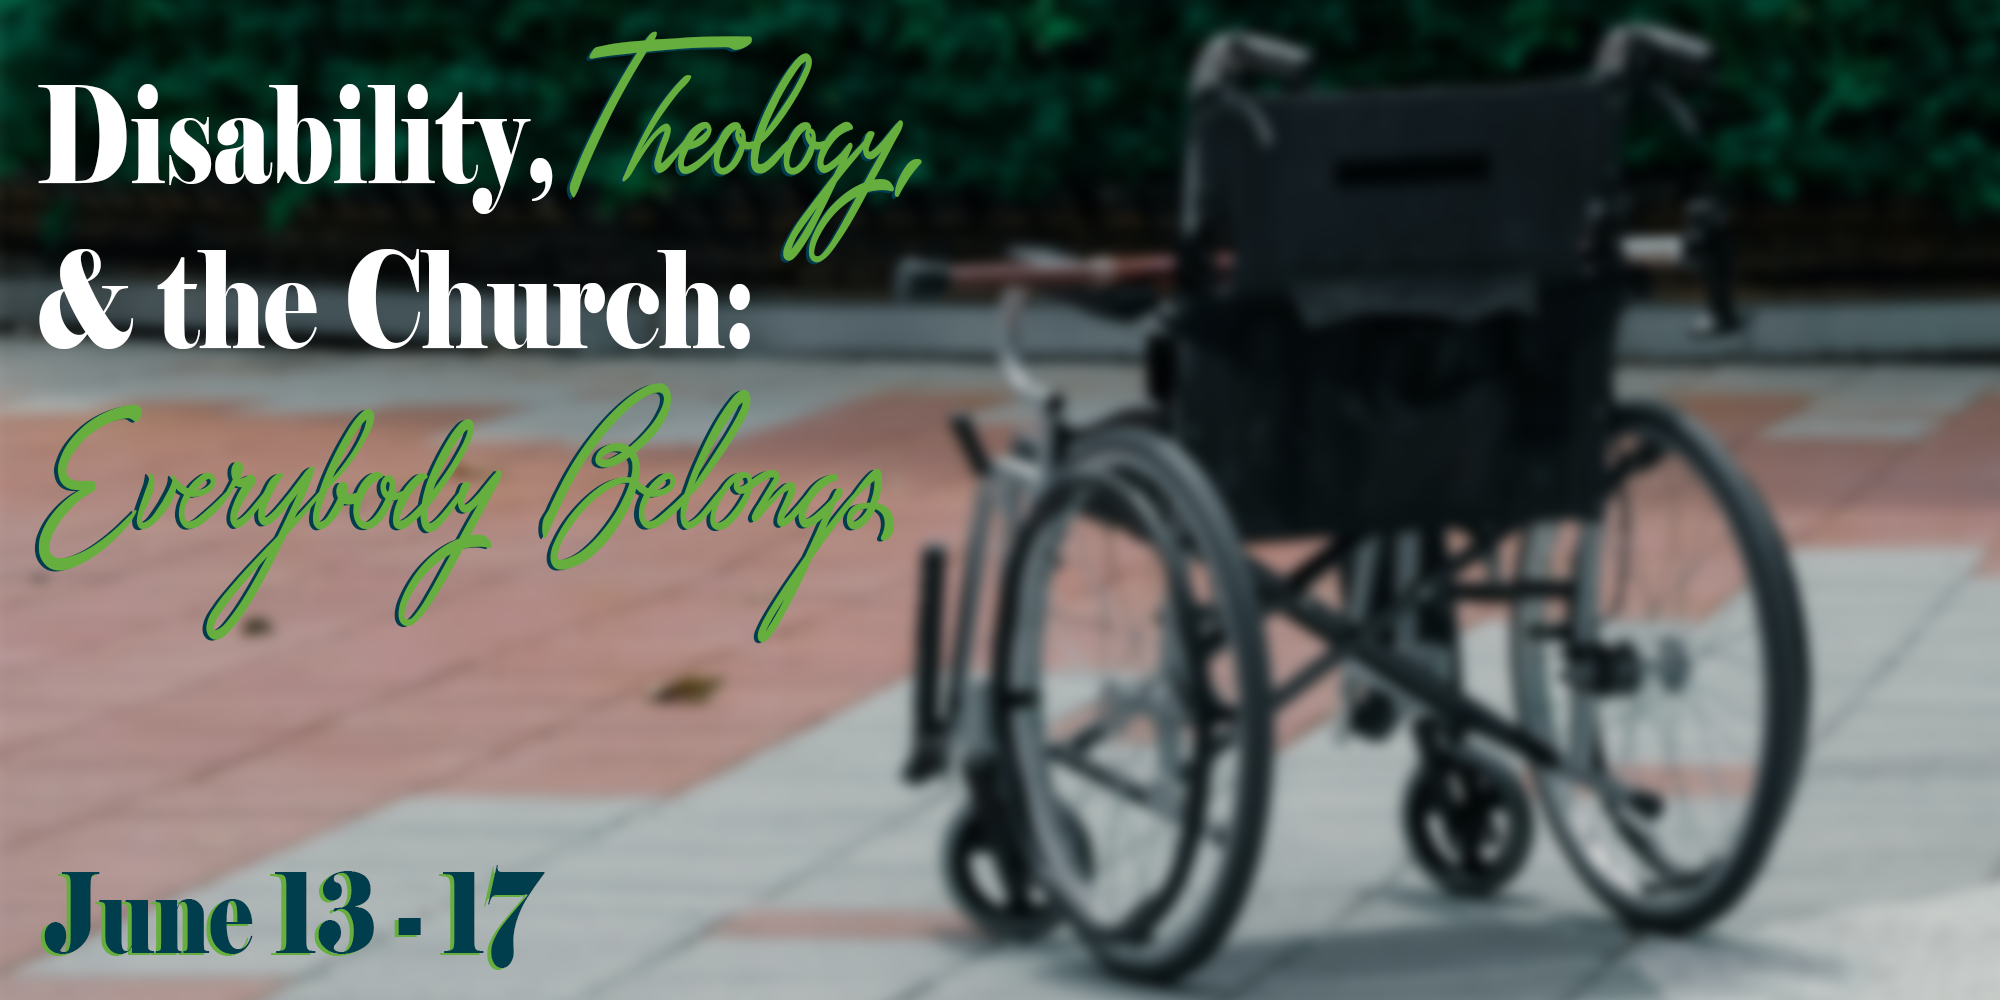 Disability, Theology, and the Church from June 13th to 17th